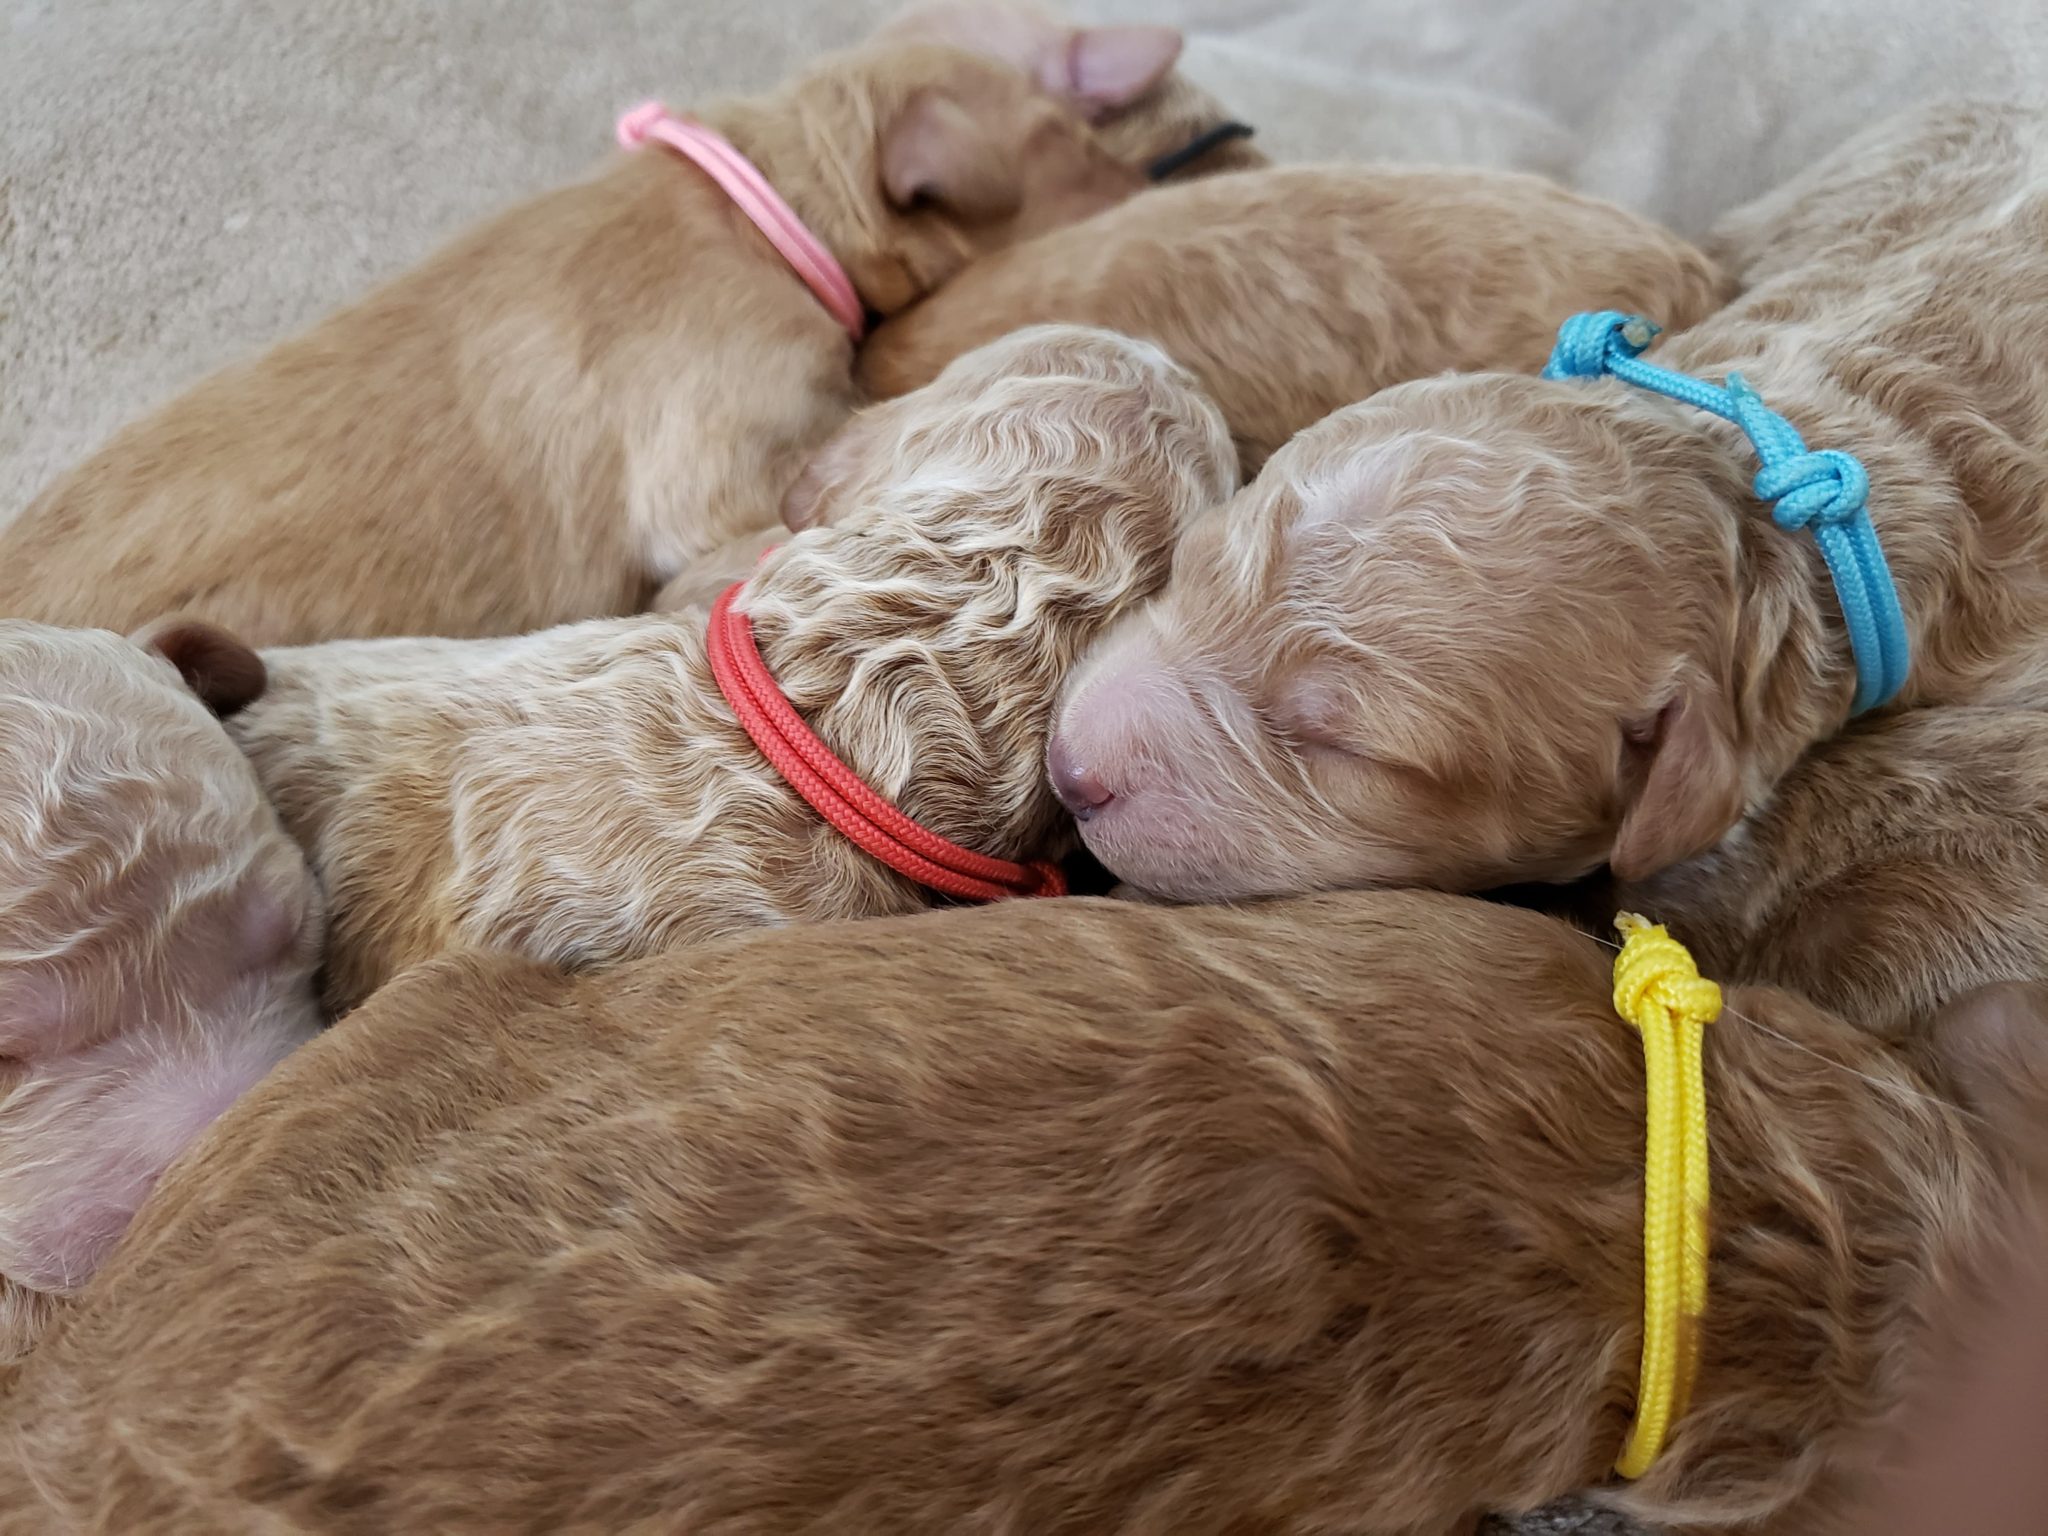 A litter of Mini Irish Goldendoodles raised in Iowa by Poodles 2 Doodles